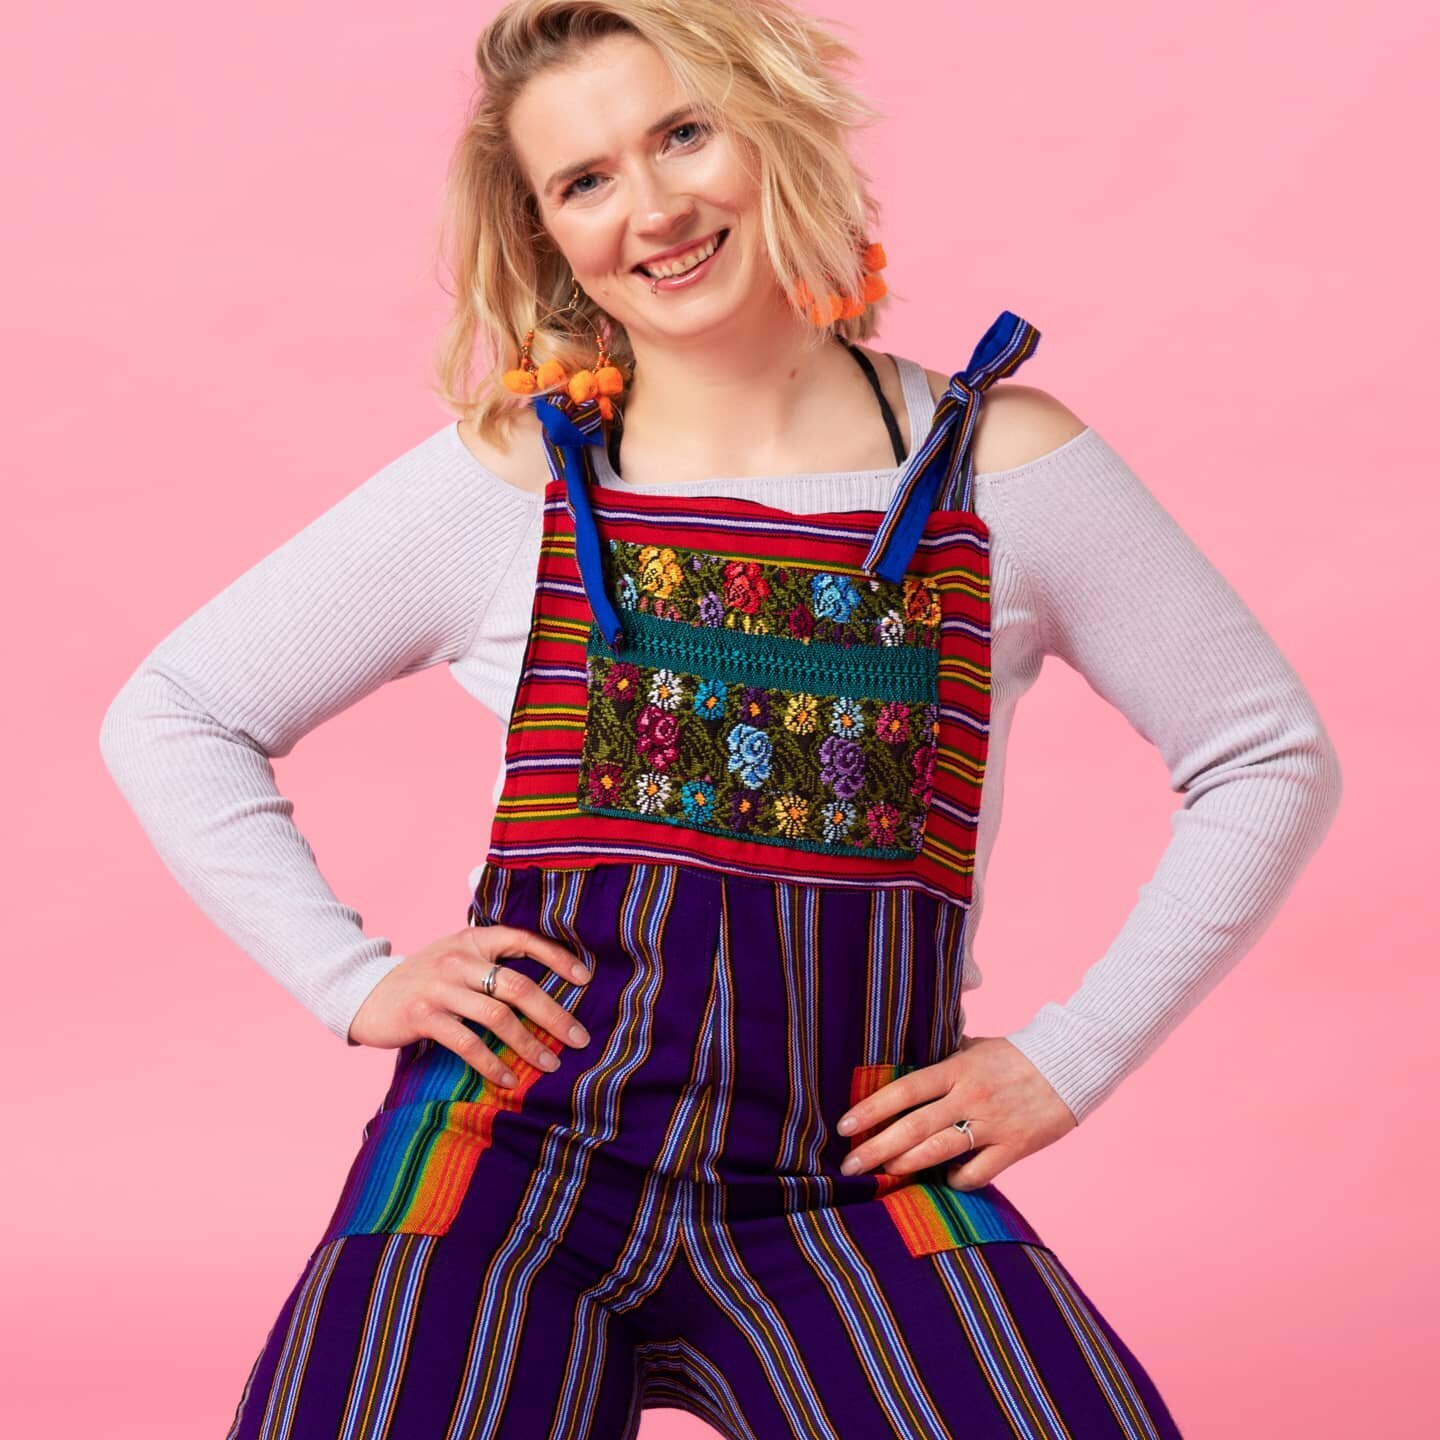 One of a kind dungarees made with 100 recycled Guatemalan fabrics 💓 and they are in the January sale!!

💙FREE UK shipping❤️

@catmj88
#shopethically
#shopsmall
#recycledfabrics
#ethicalshopping
#sustainablefashion
#hippeiwear
#hippiedungarees
#unis